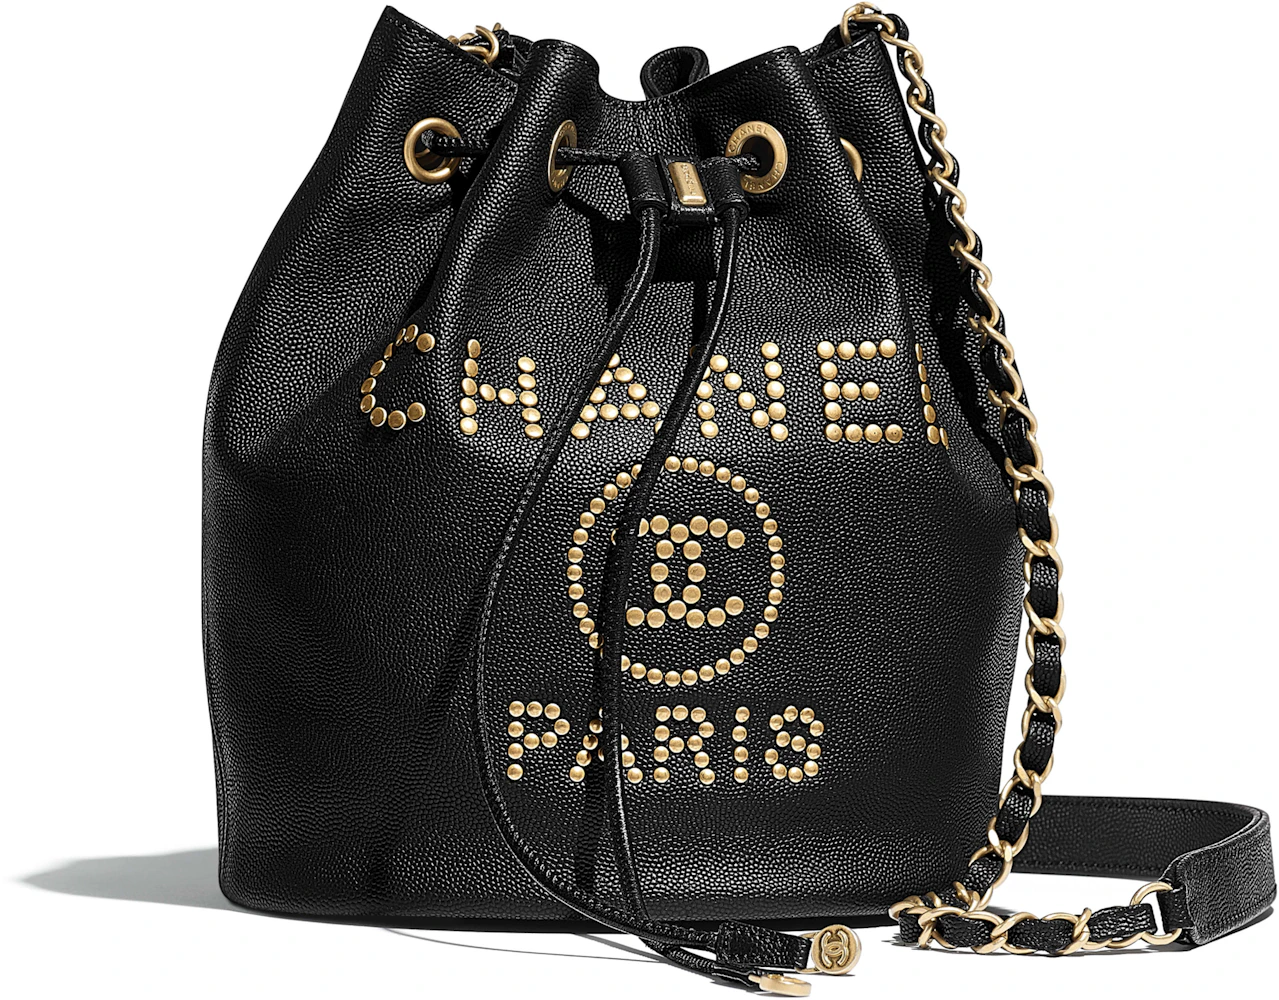 Chanel Drawstring Bag - Review with Pros & Cons